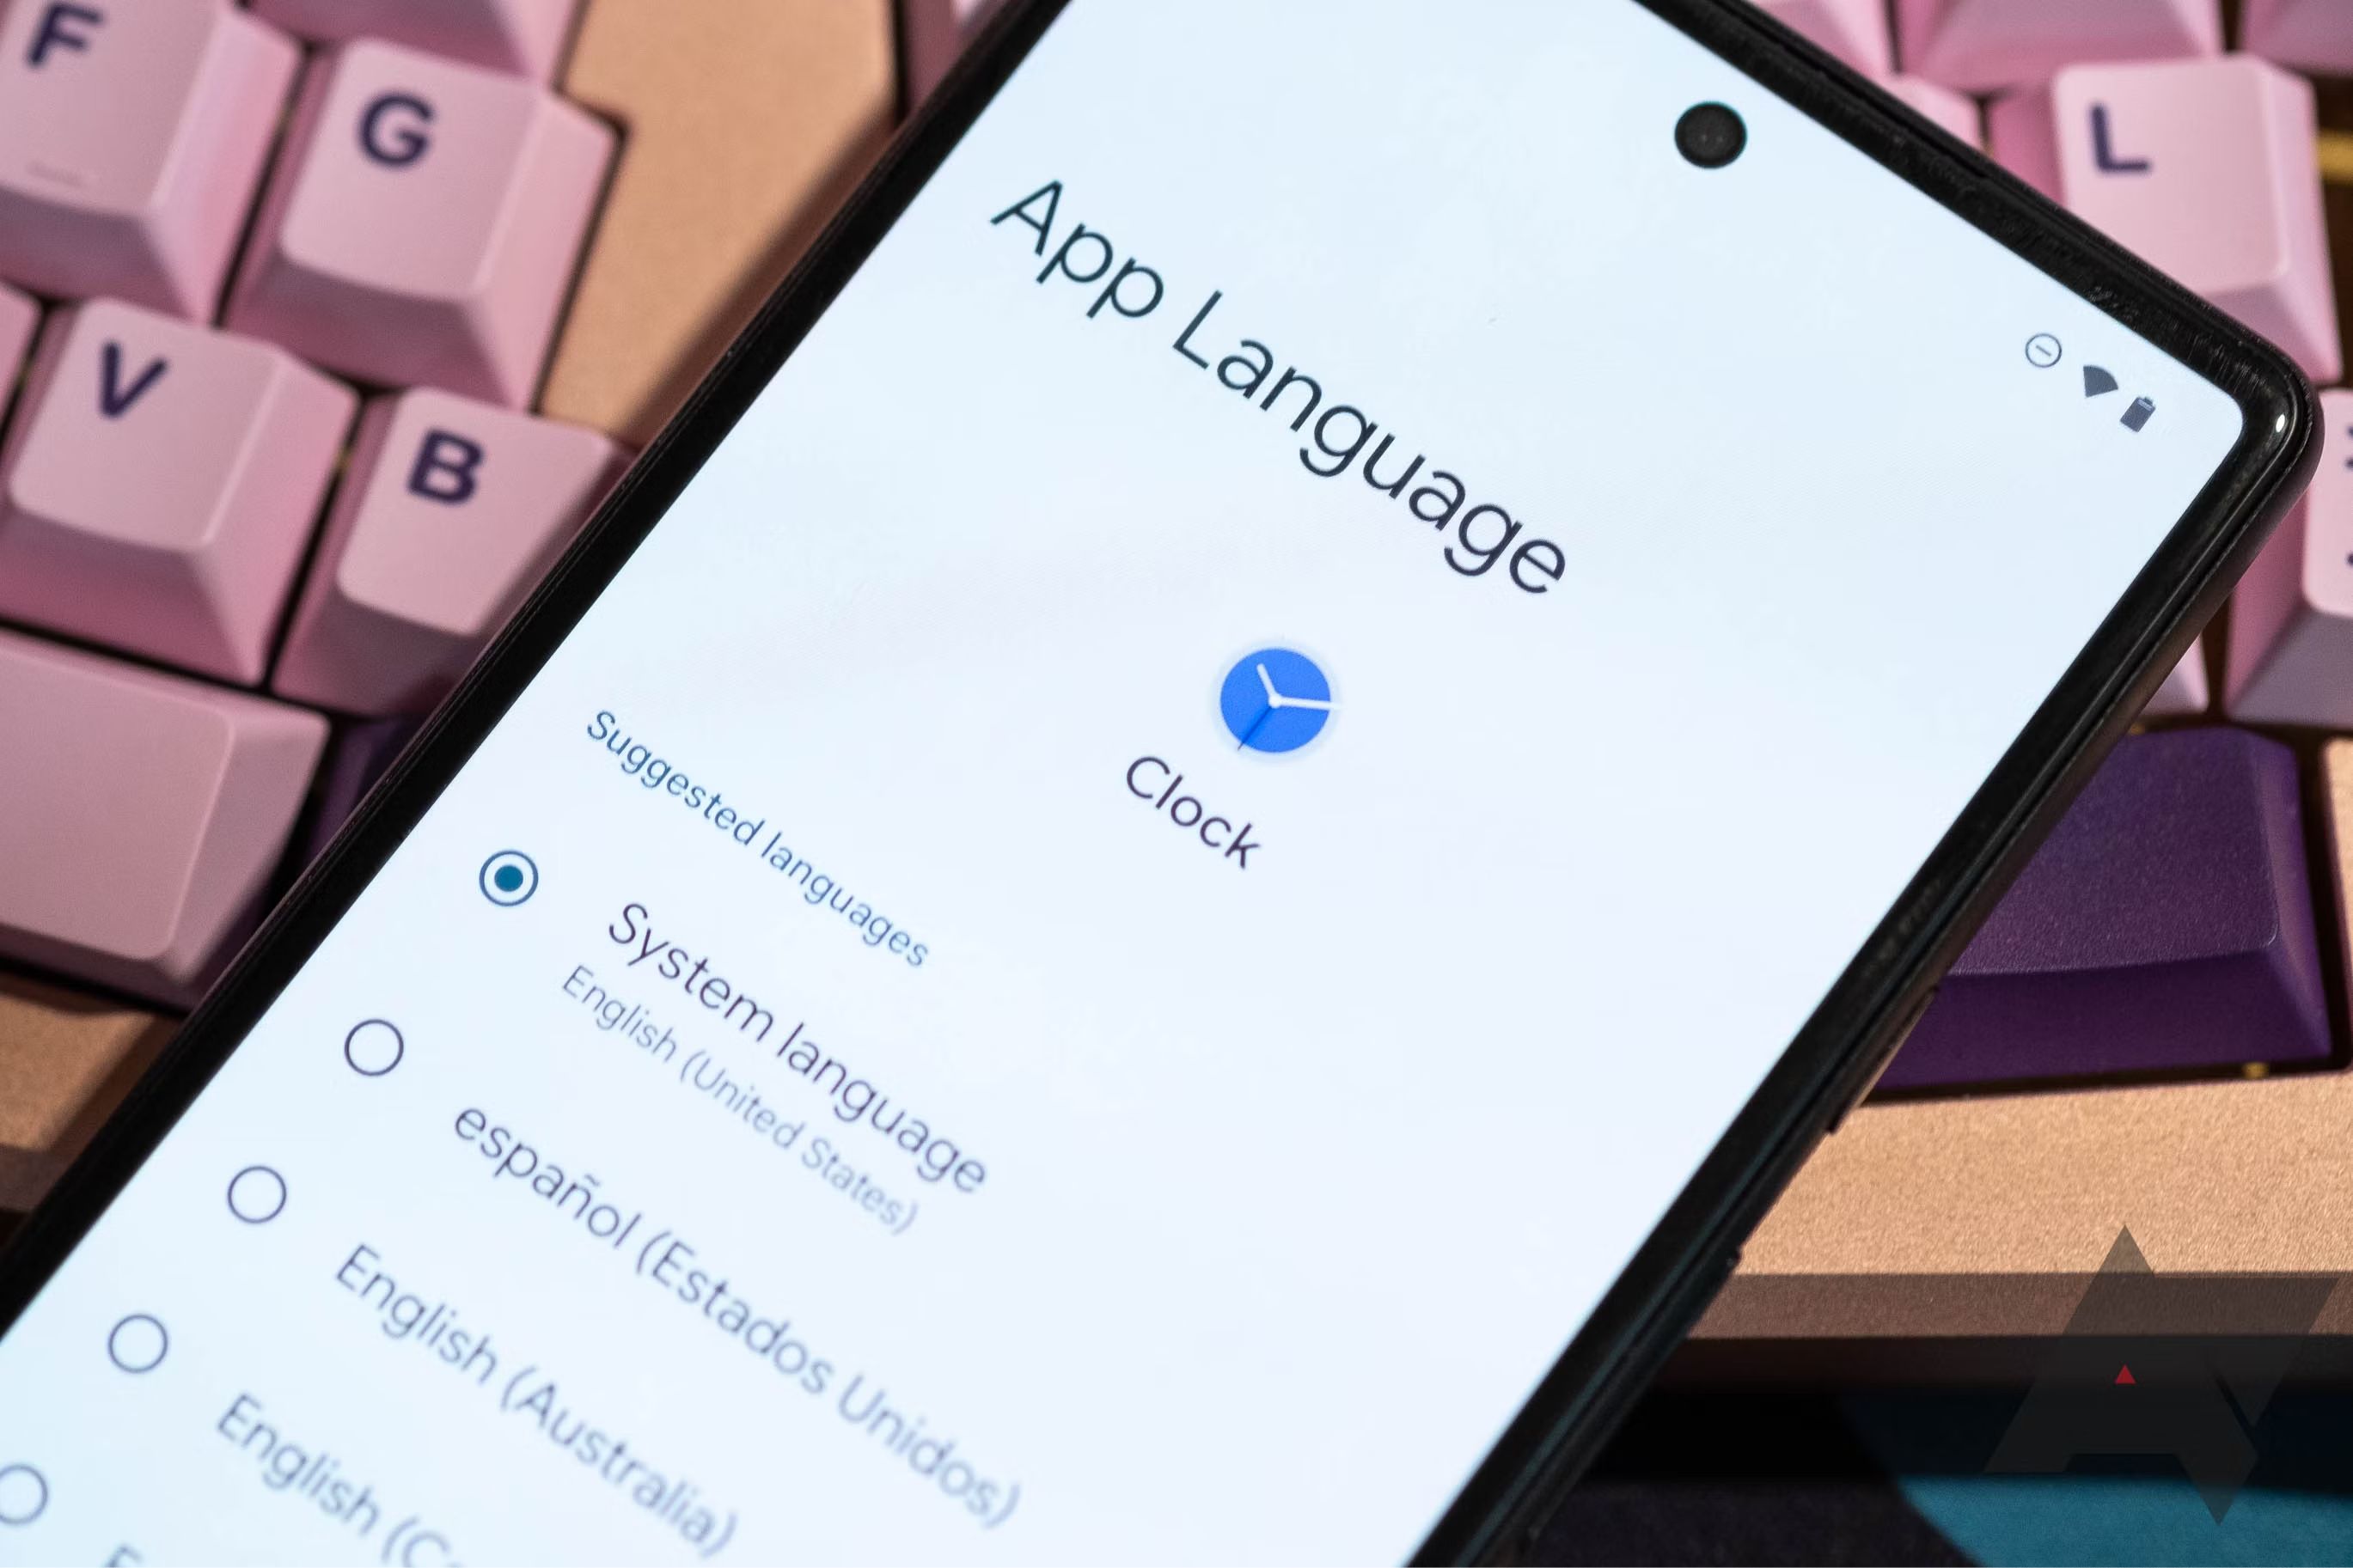 How To Change Keyboard Language On Android